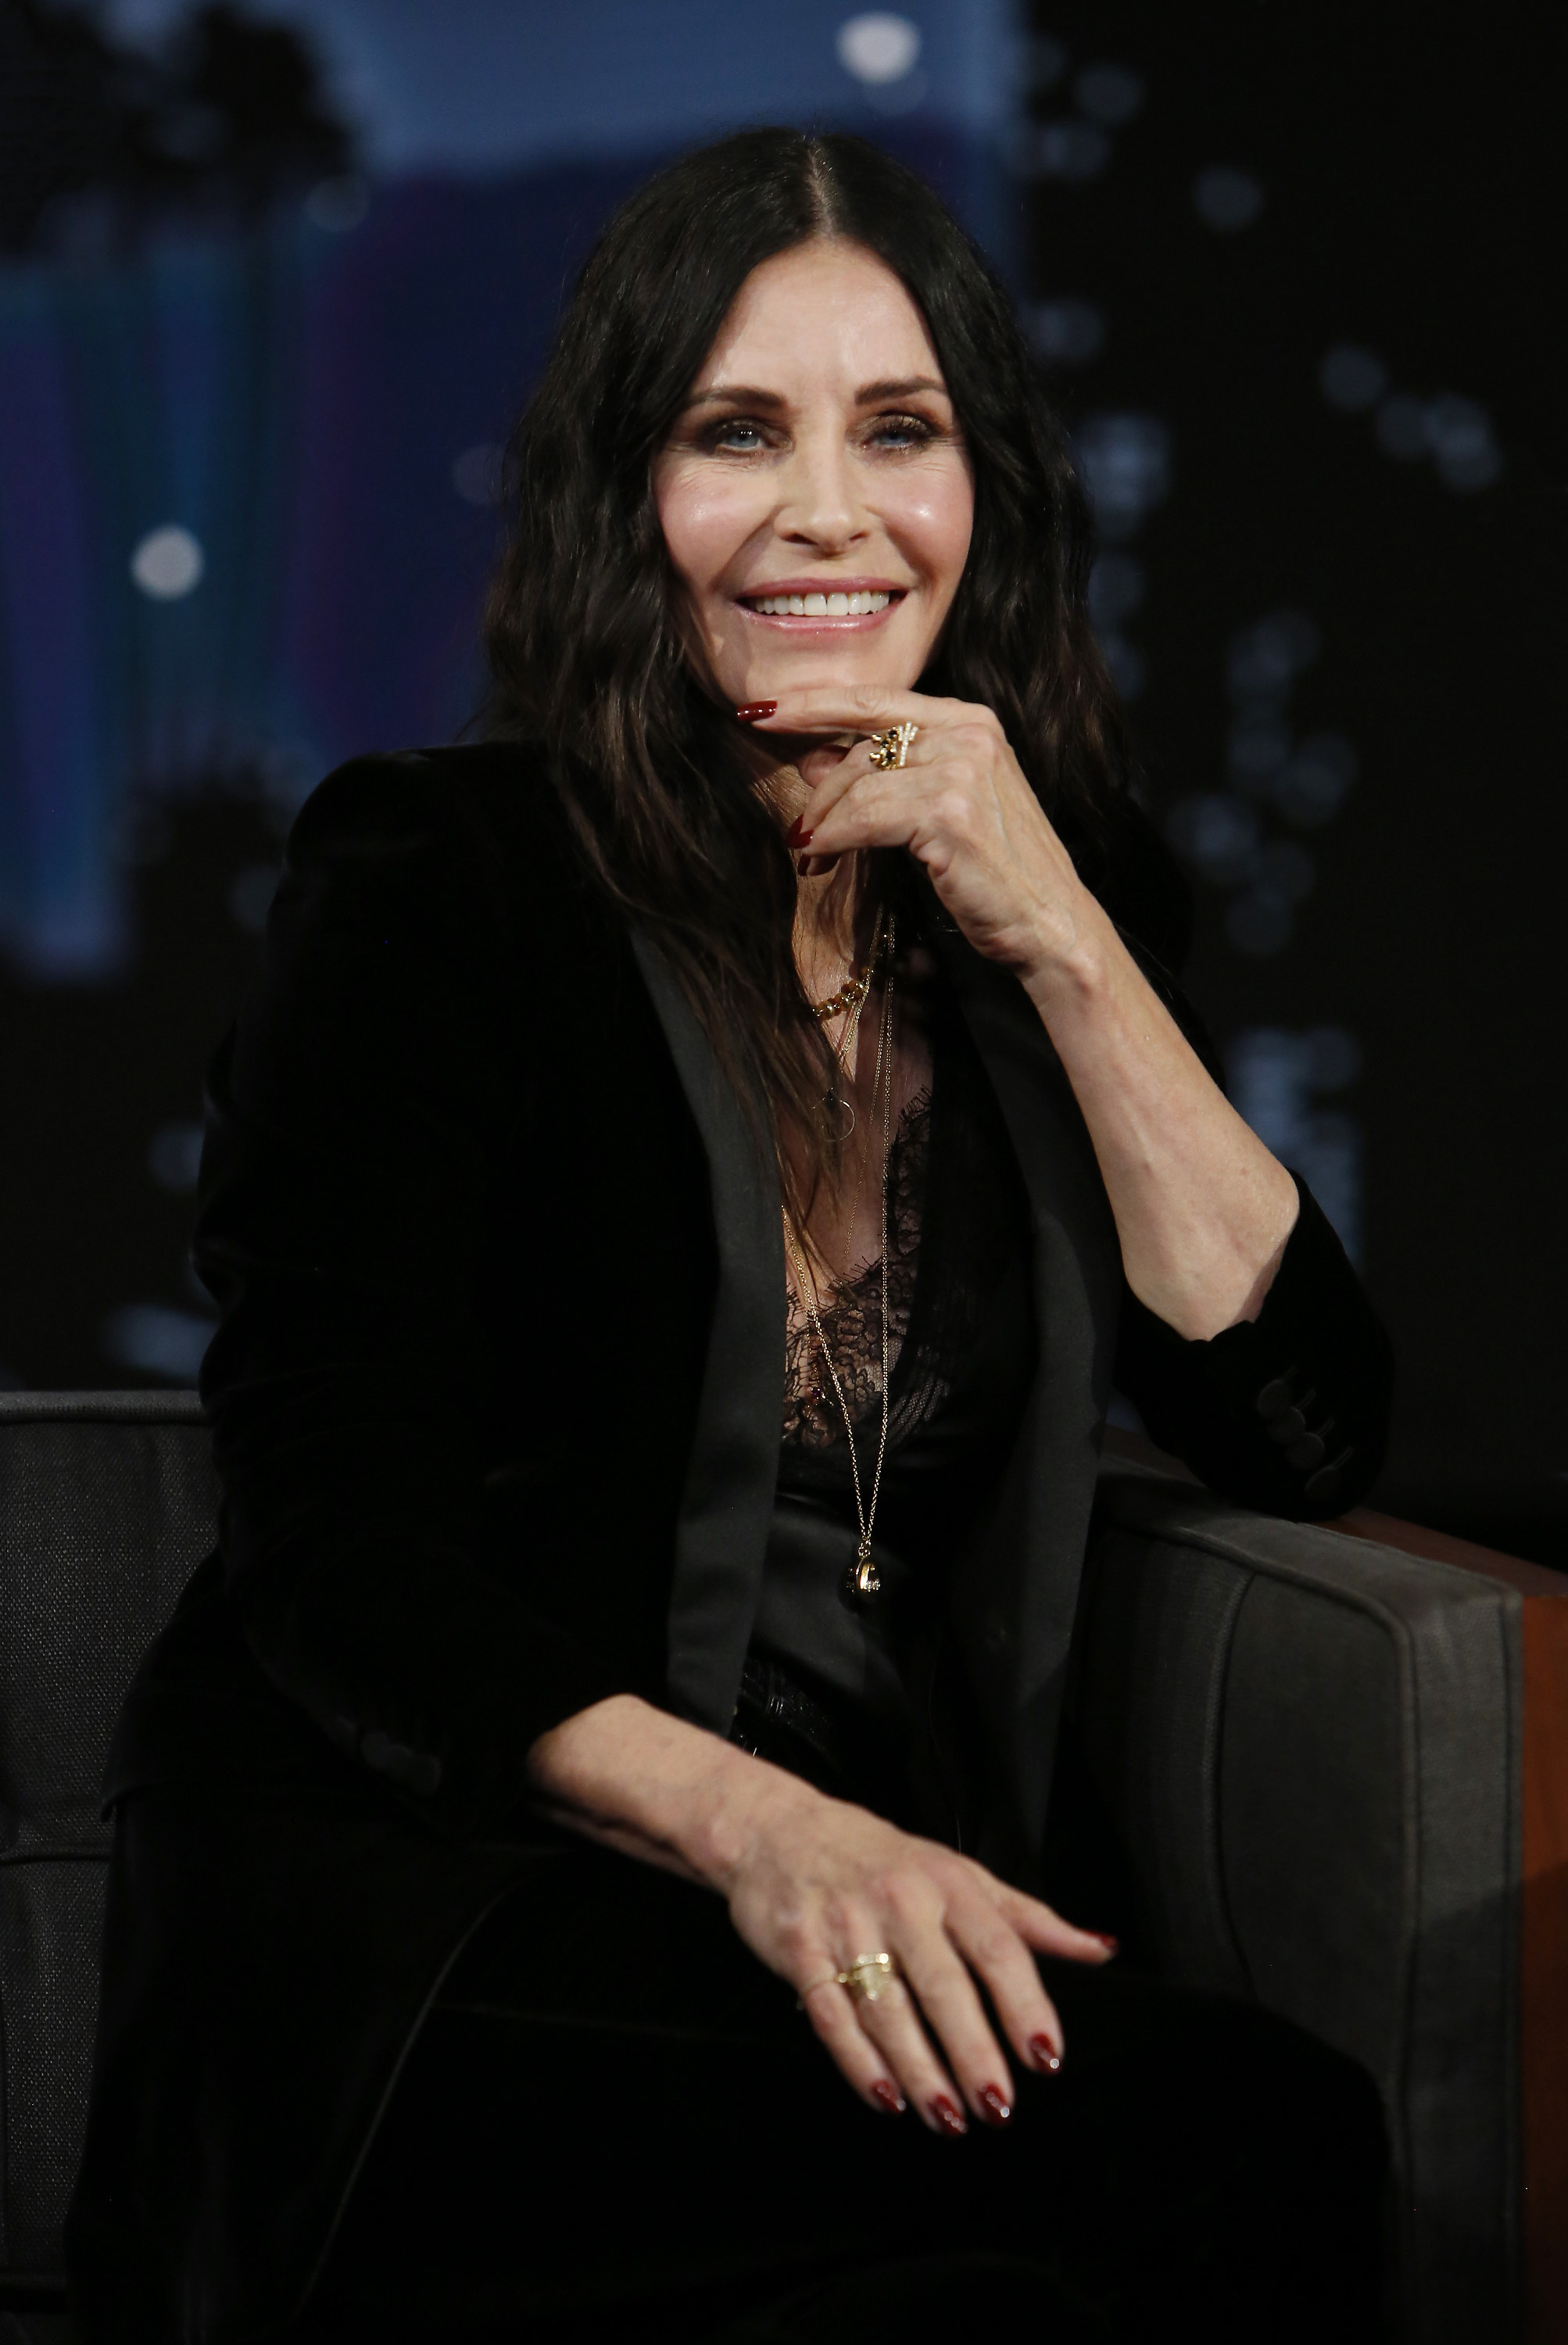 Courtney Cox sits on a couch for a late night talk show, wearing a black suit and her hand on her chin